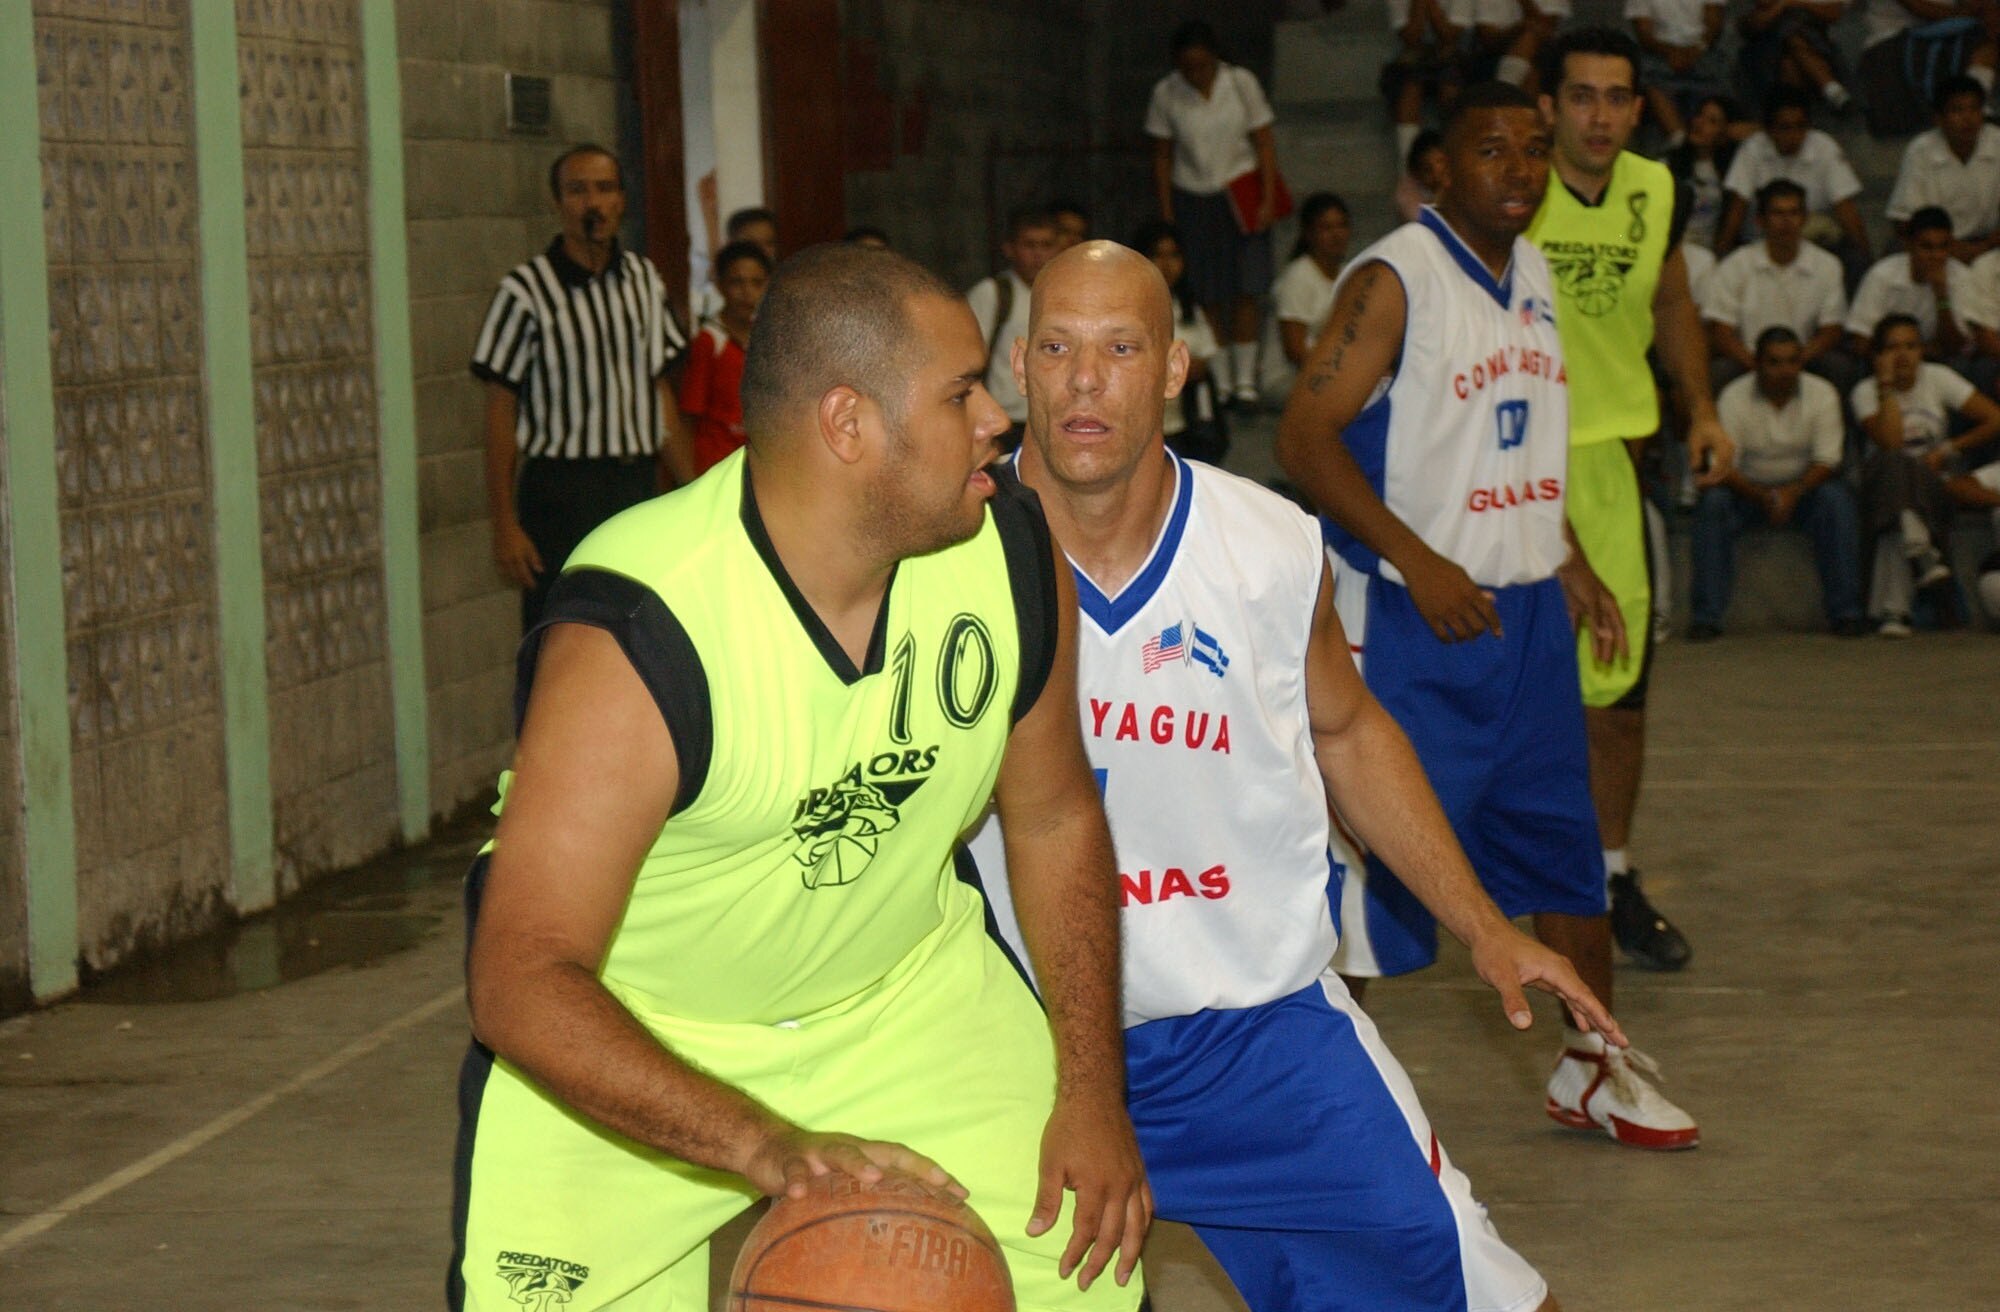 Army Staff Sgt. Pete Schaffer, a member of the Soto Cano Air Base basketball team, the Comayagua Iguanas, plays tight defense against Alejandro Cruz from the Tegucigalpa Predators. The base team traveled to Siguatepeque, Honduras to take part in a sports tournament. U.S. Air Force photo by Senior Airman Shaun Emery.